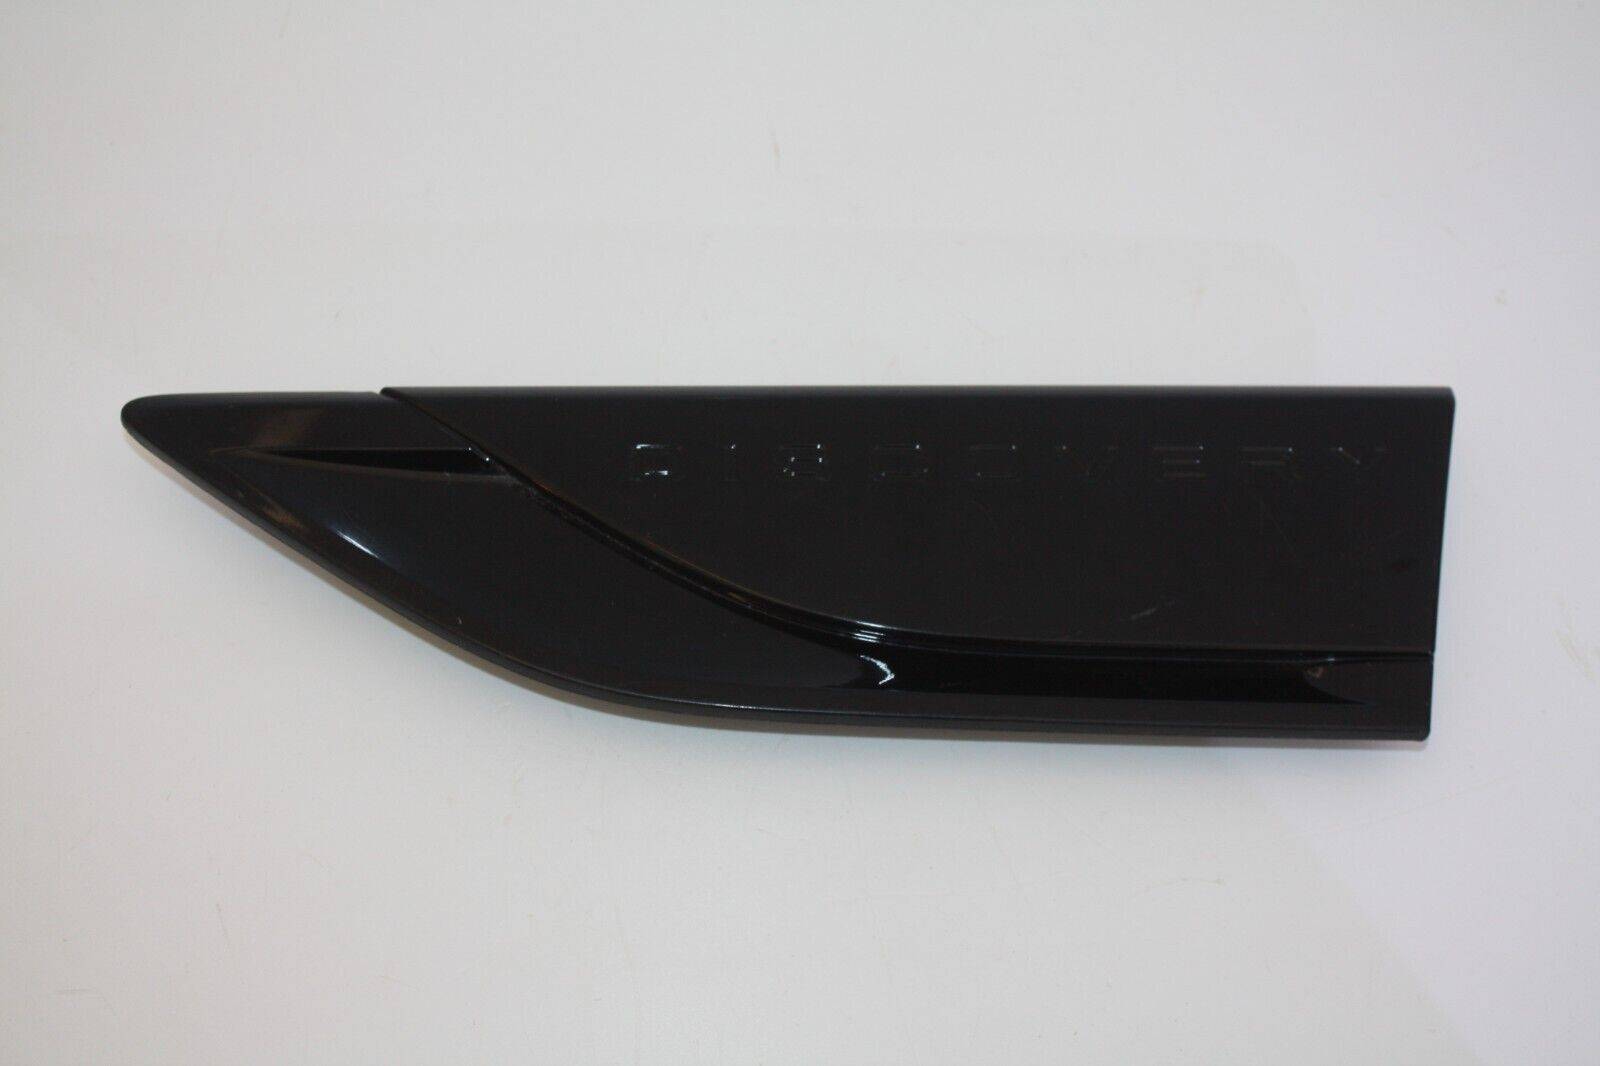 Land Rover Discovery Front Left Wing Trim HY32 280B11 AC Genuine 176234983703